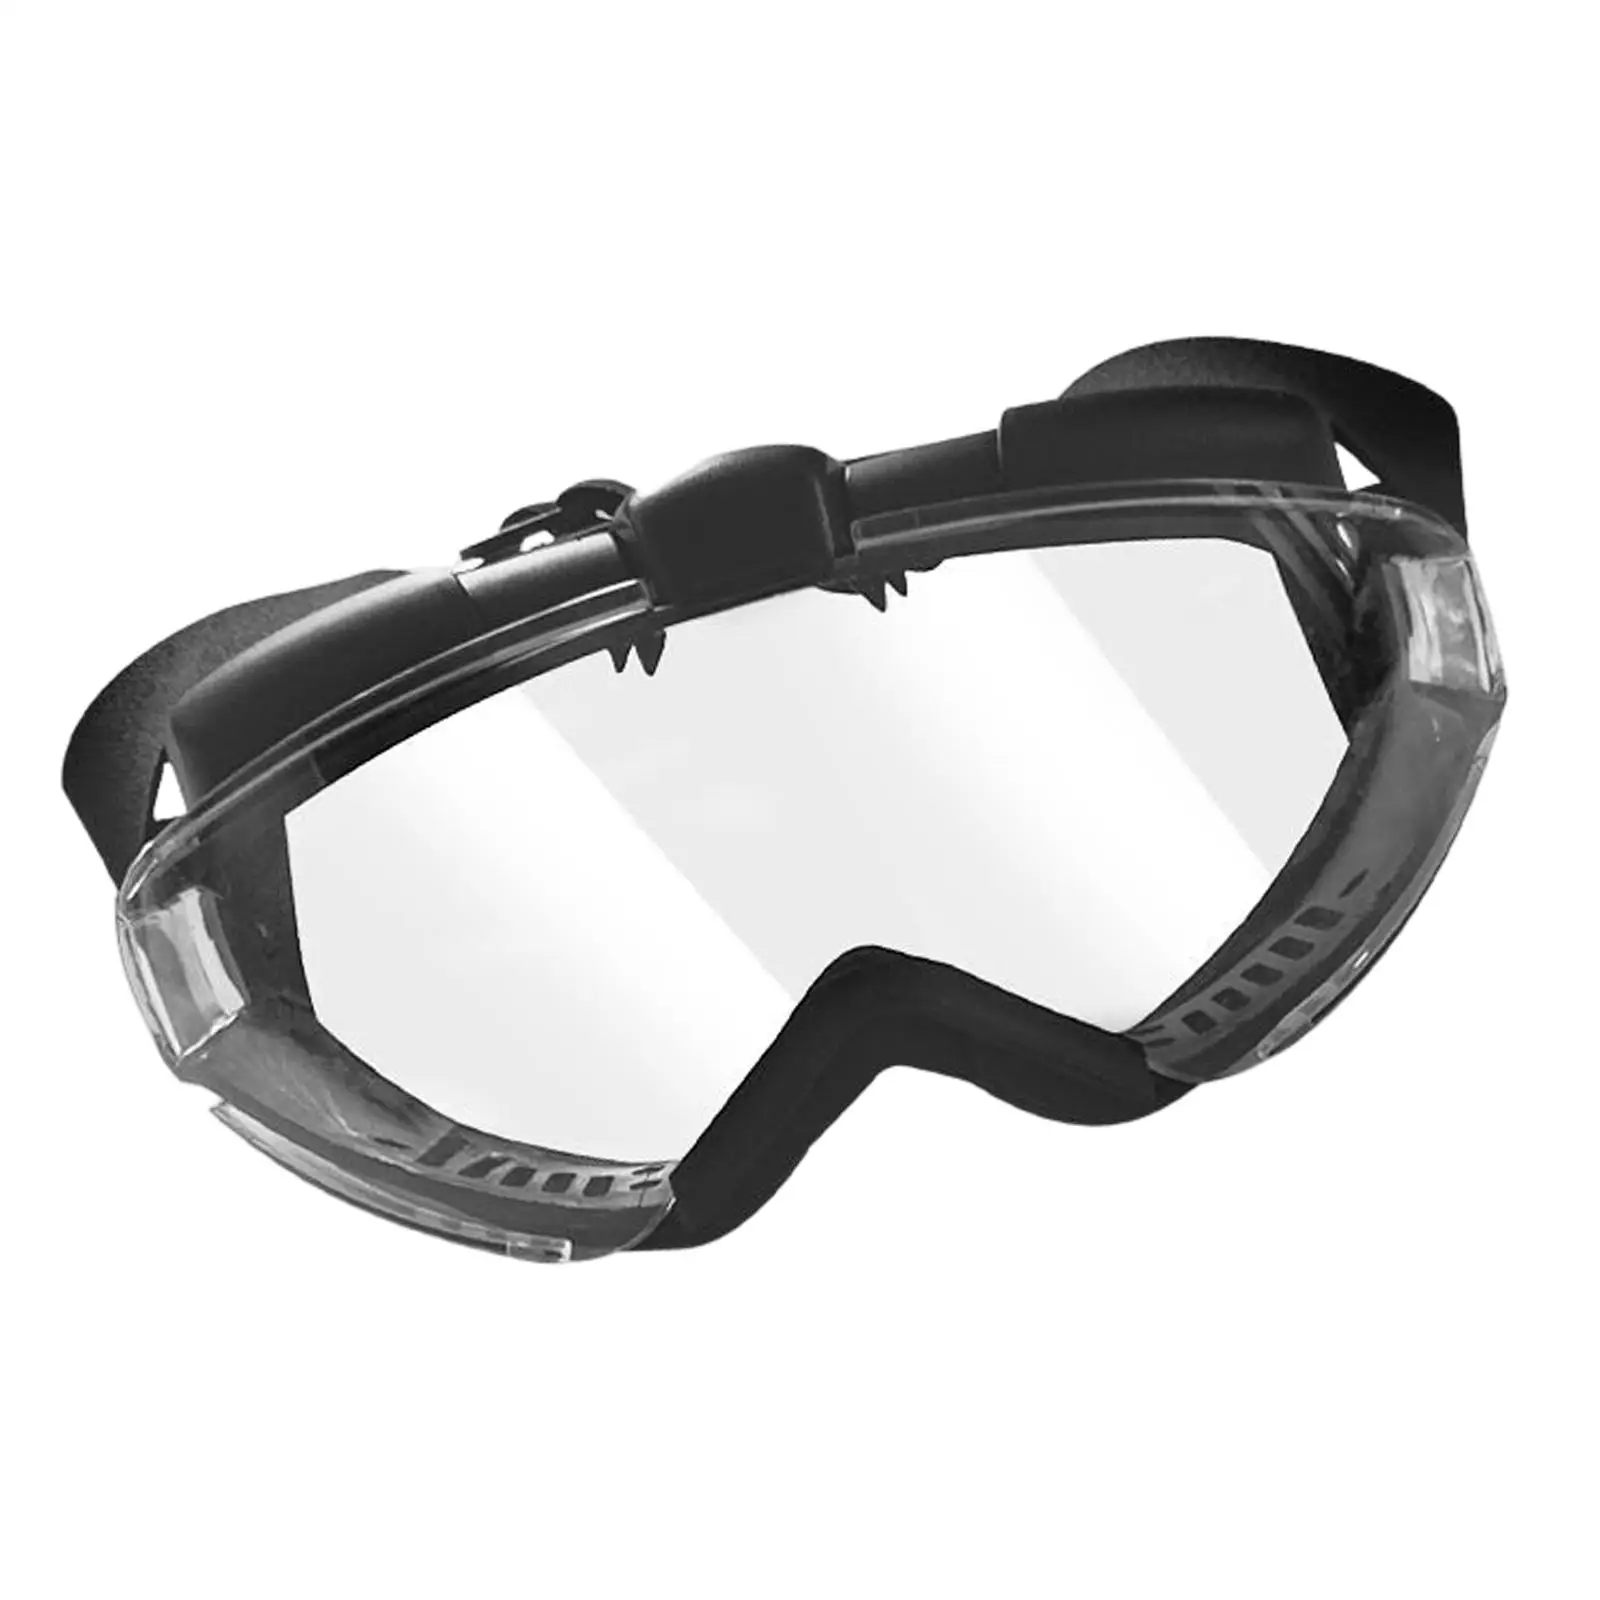 Outdoor Glasses with Adjustable Strap Dustproof for Cycling Skating Riding